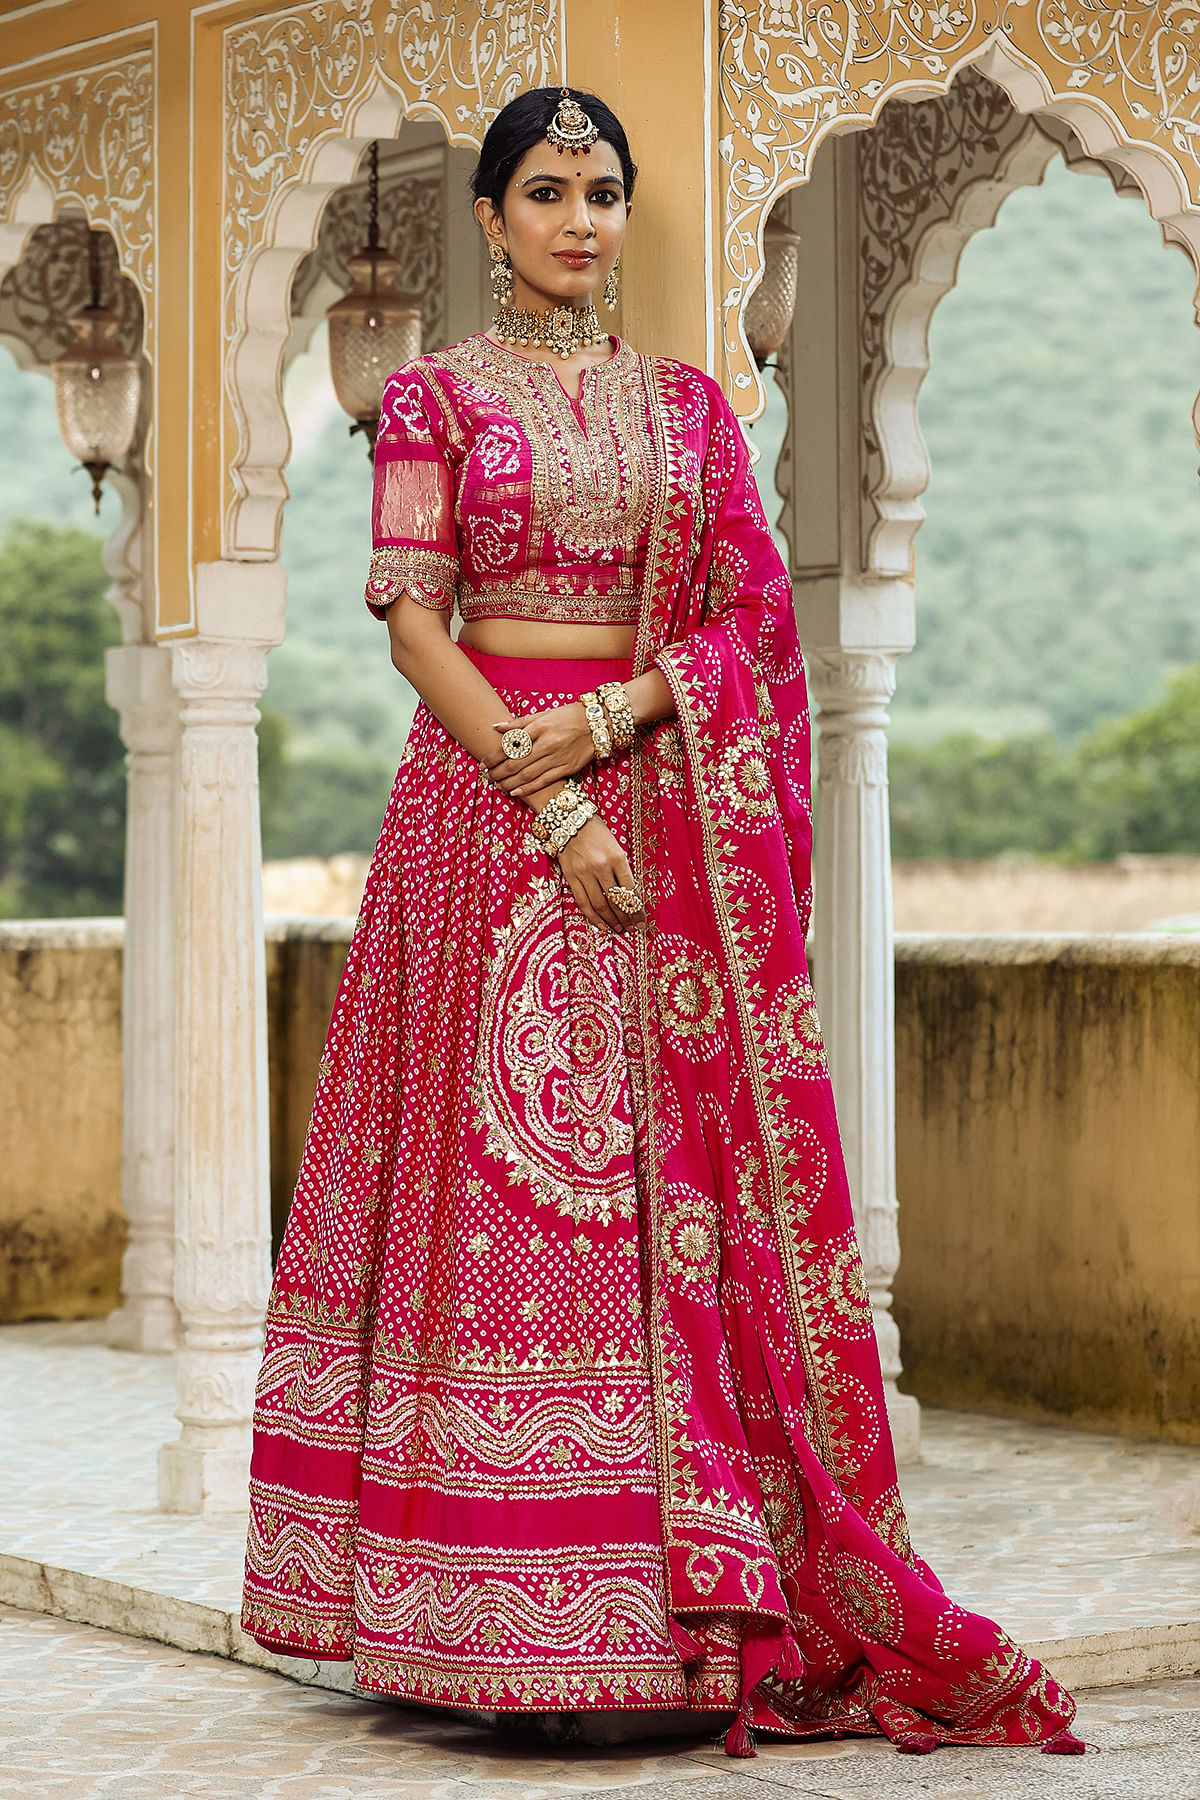 Navy Blue And Pink Party Wear Outfit, Bridal Lehengas, Diamond, London, UK